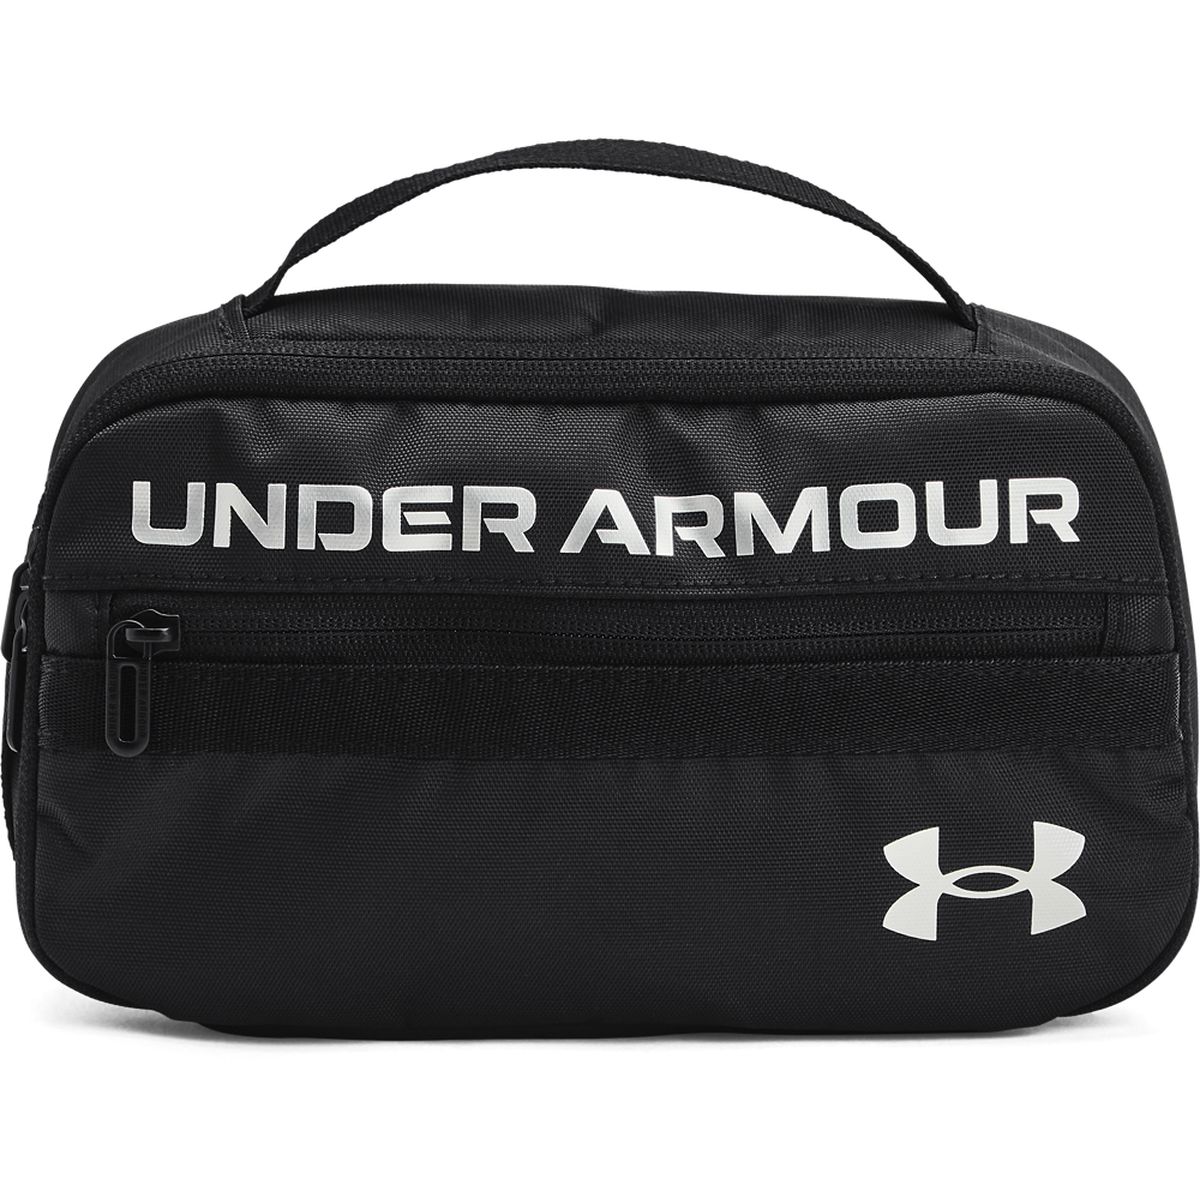 Under Armour UA Contain Travel Kit Daybag